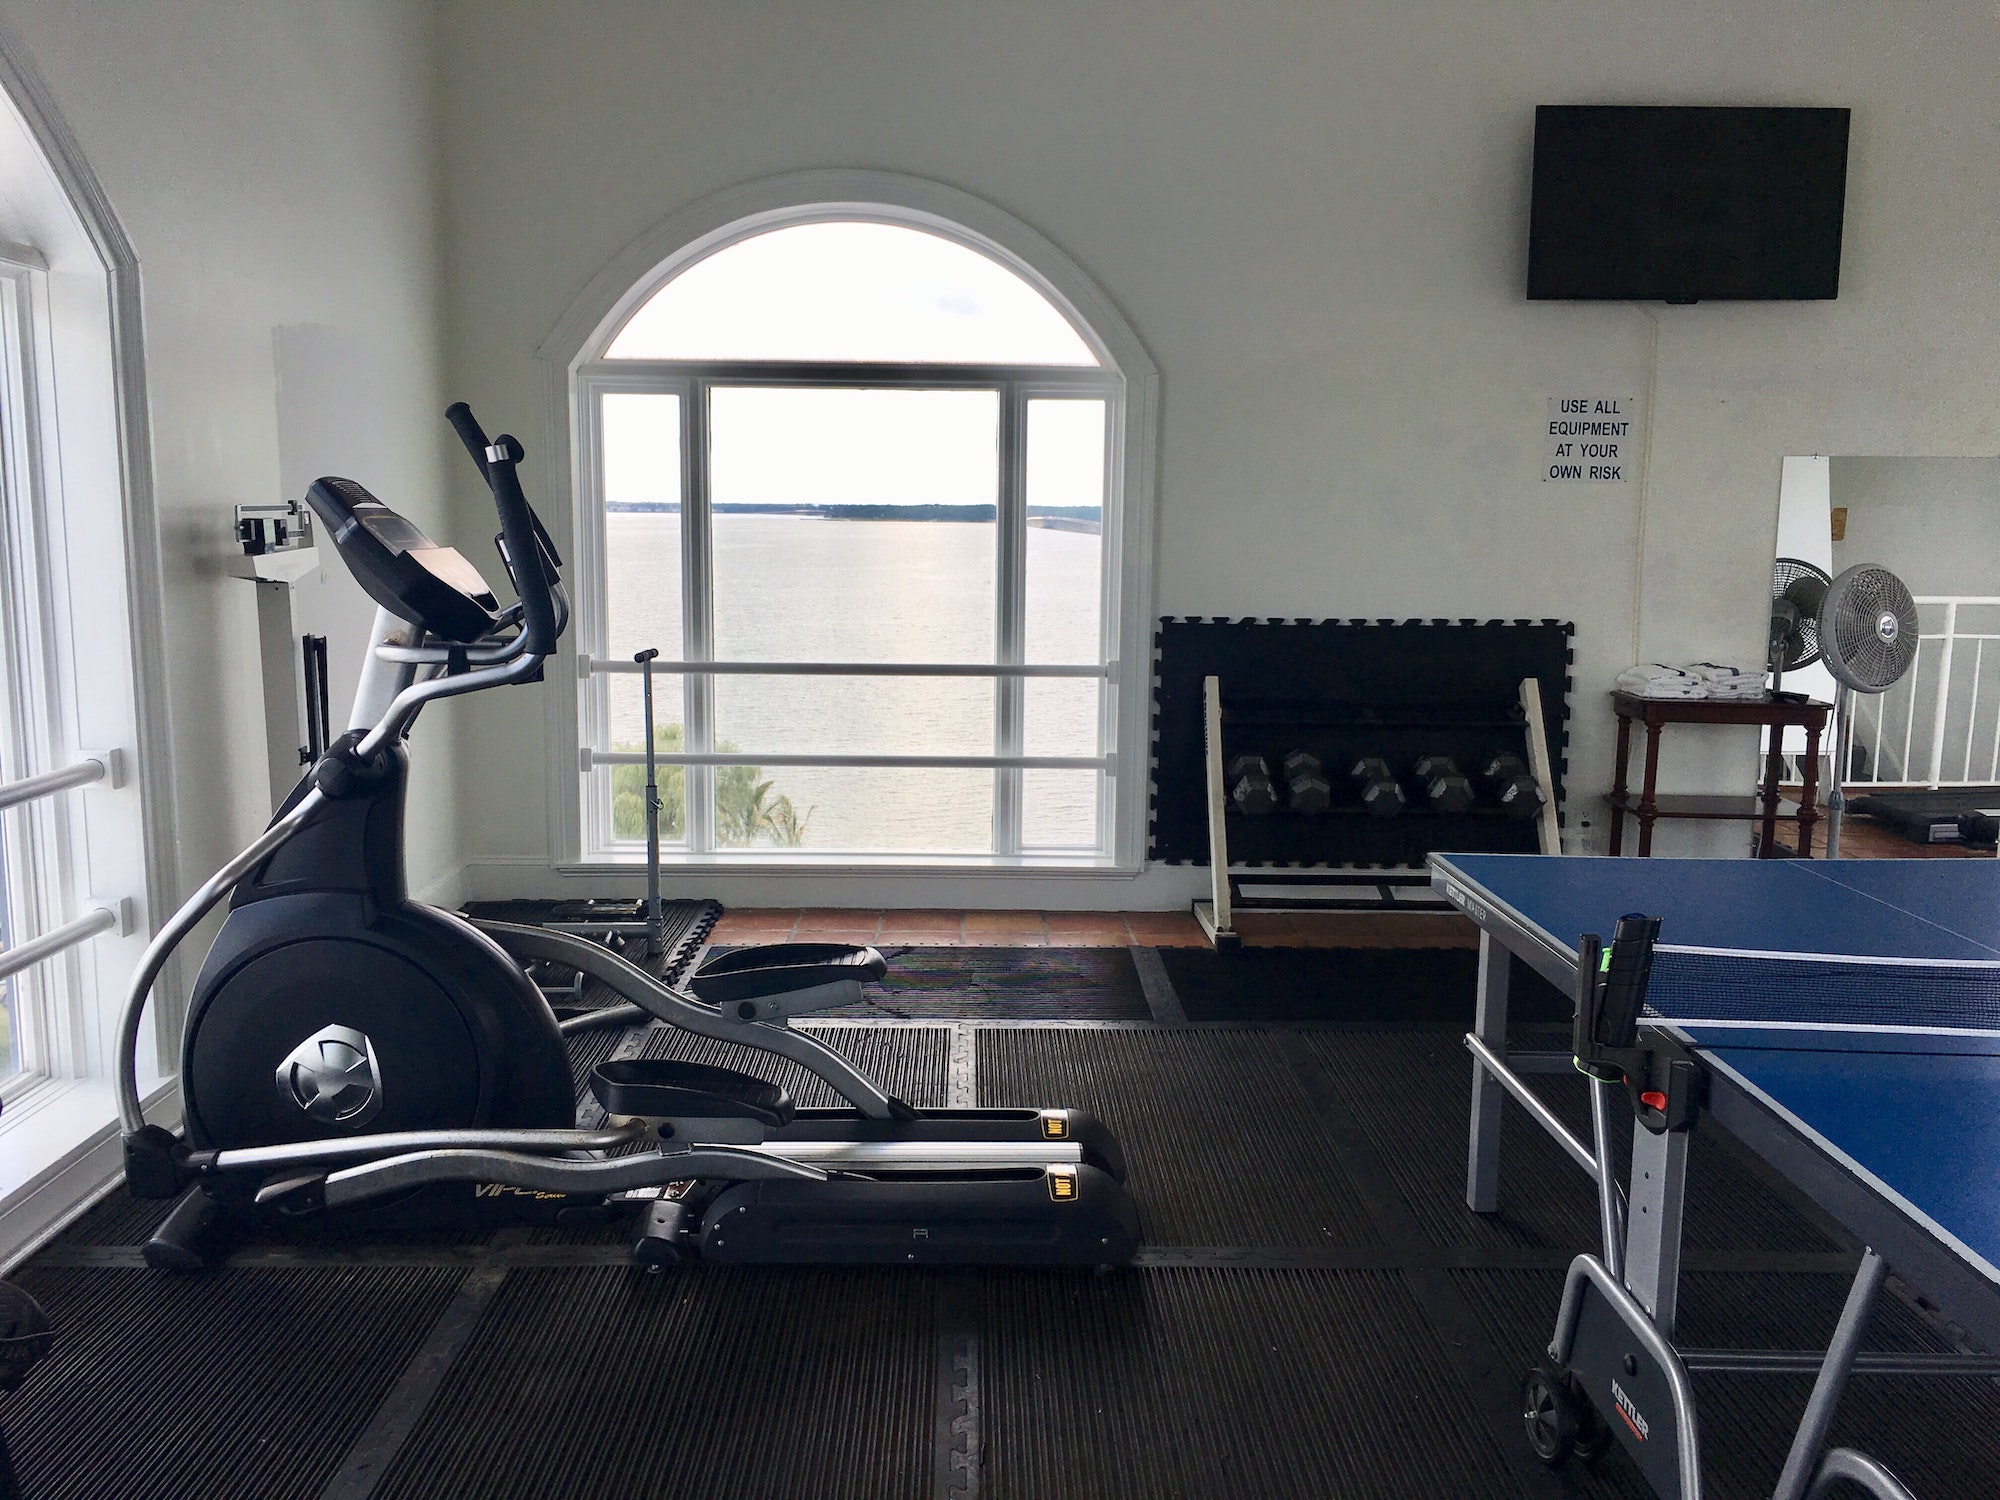 Sport training equipment in a home gym, elliptical cross trainer, ping pong table, indoor gym, home